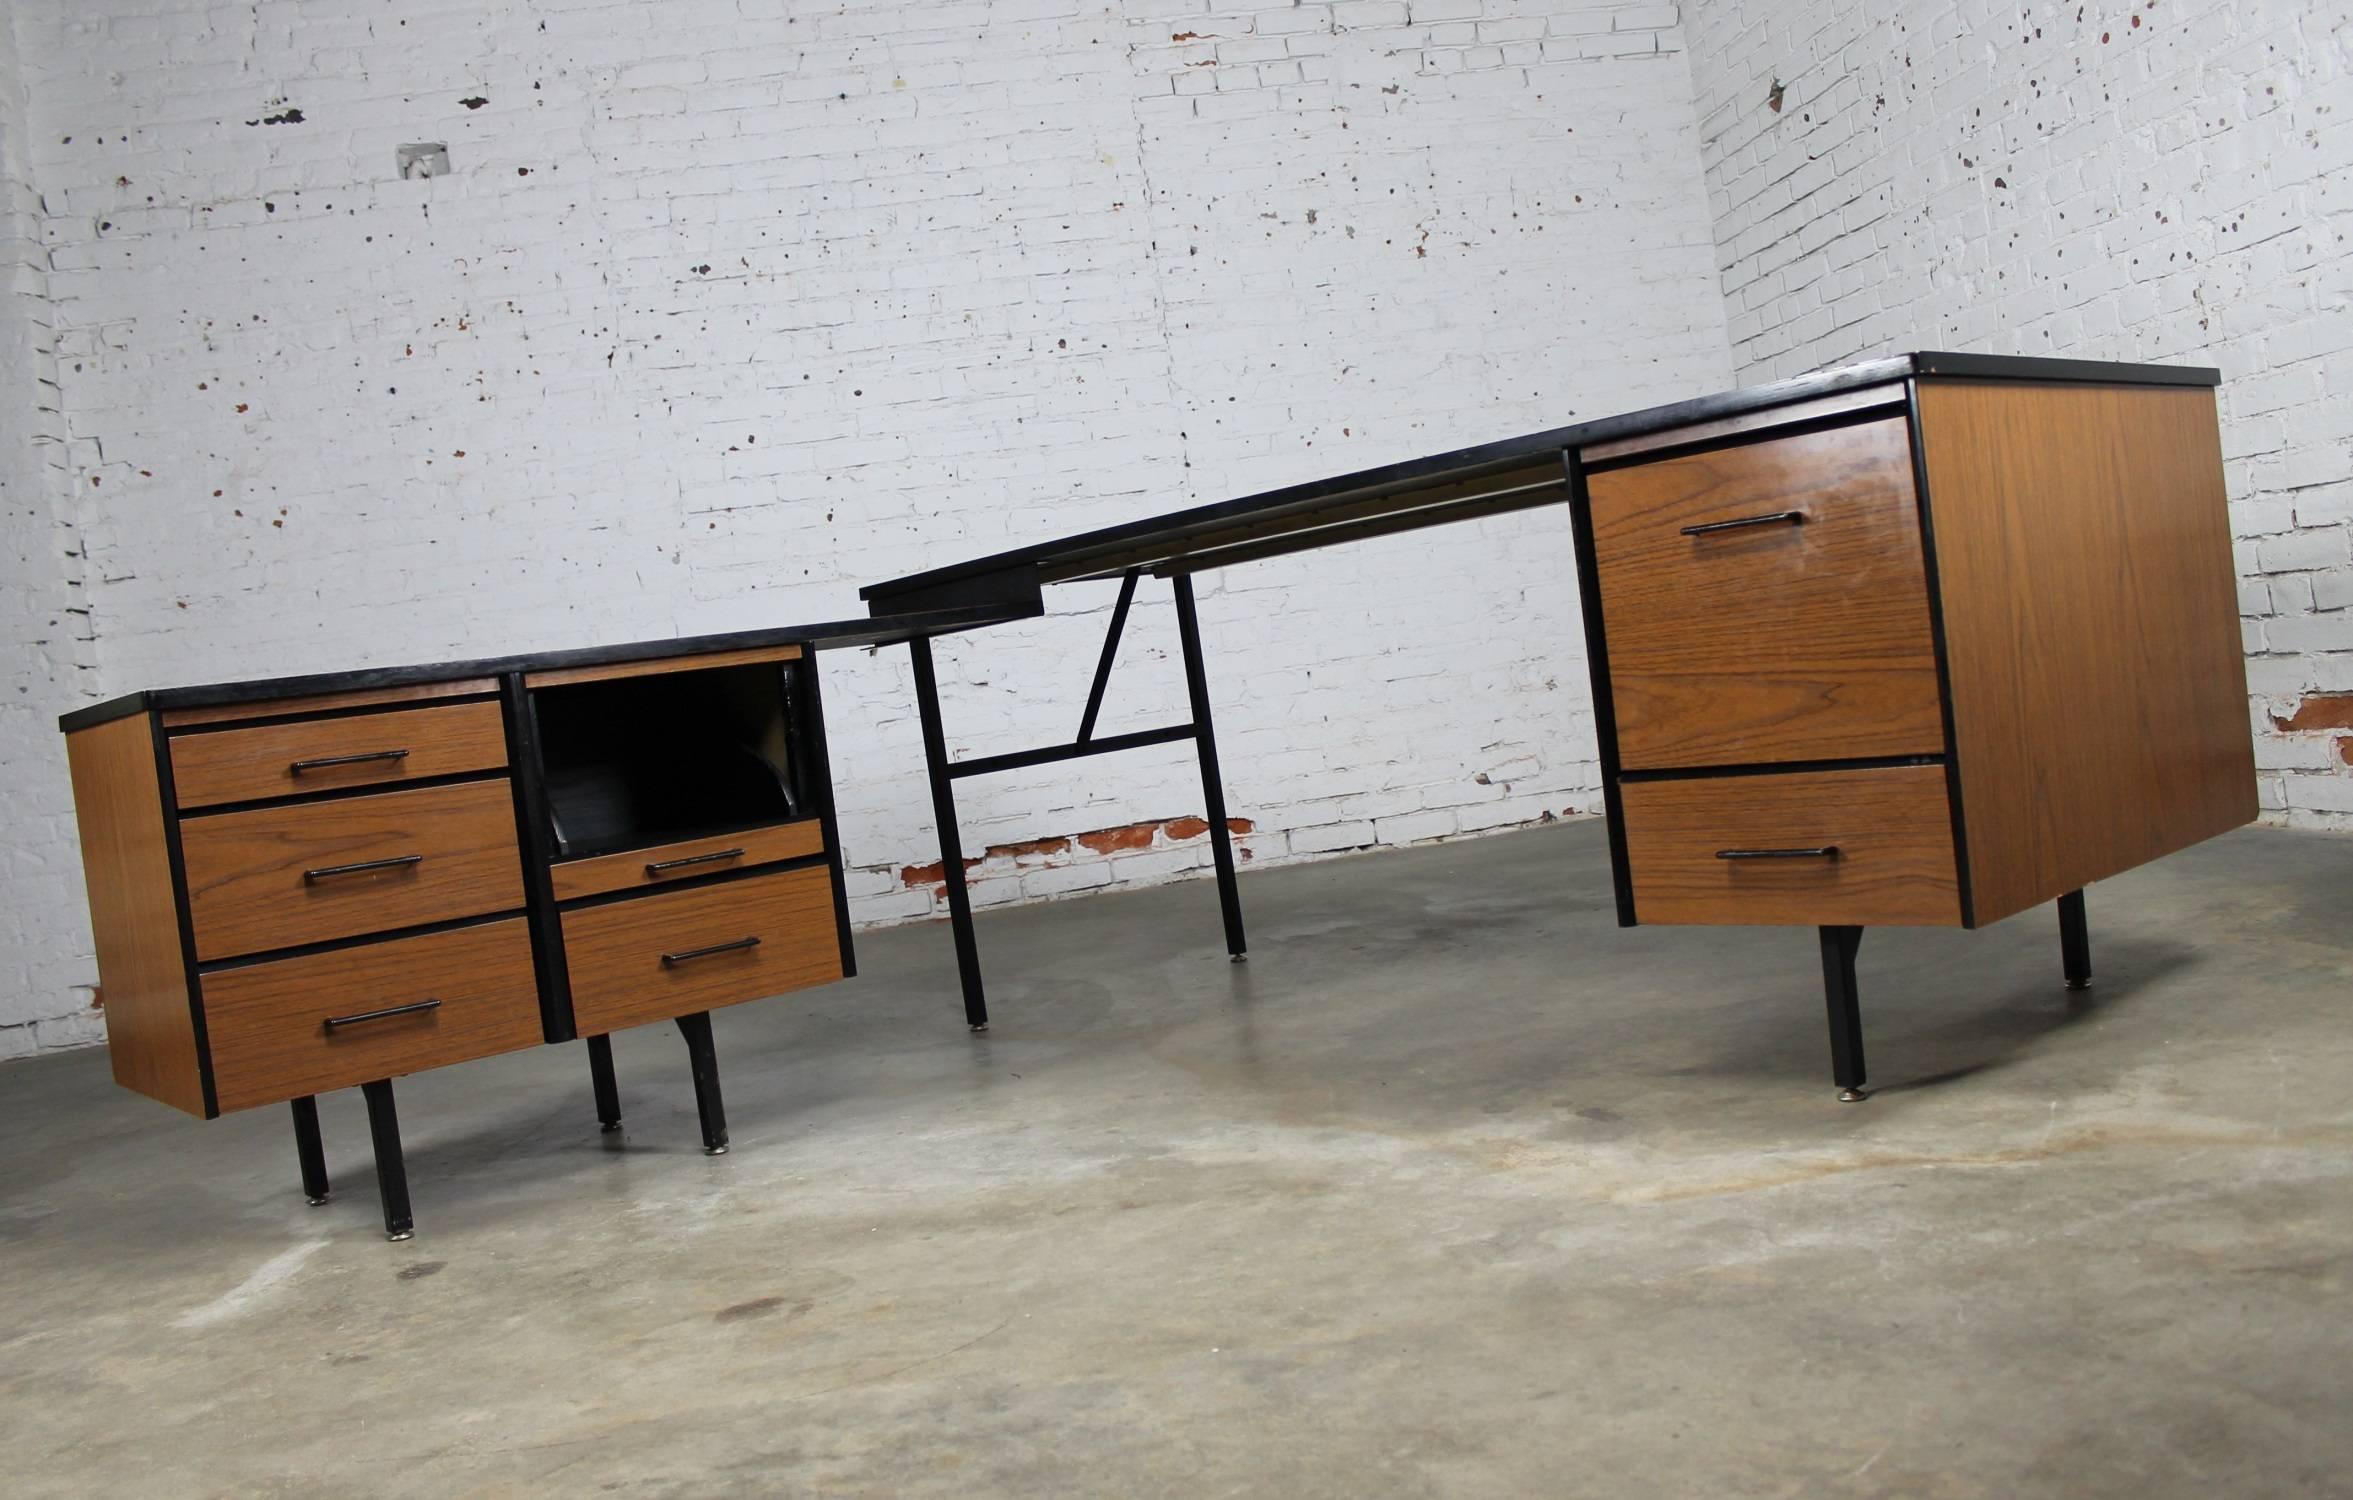 Incredible Mid-Century Modern imperial desk company desk with return. Done in walnut laminate with black metal legs and accents in the style of Florence Knoll for Knoll or George Nelson for Herman Miller and in good vintage condition, circa